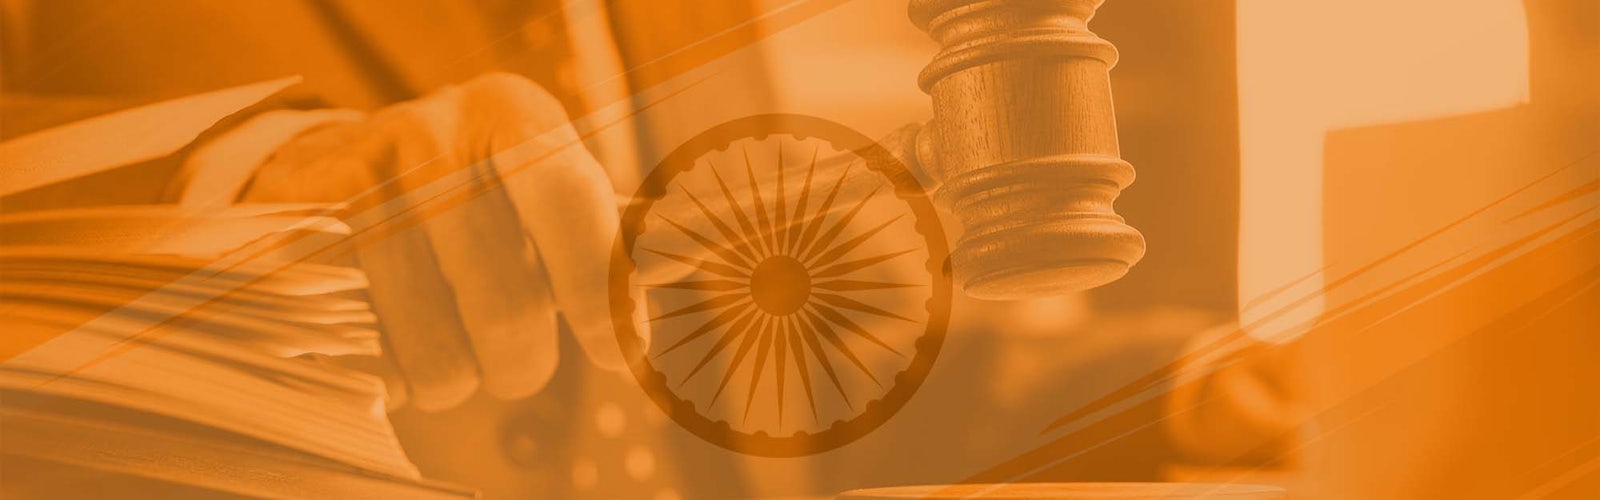 Legal situation india header image